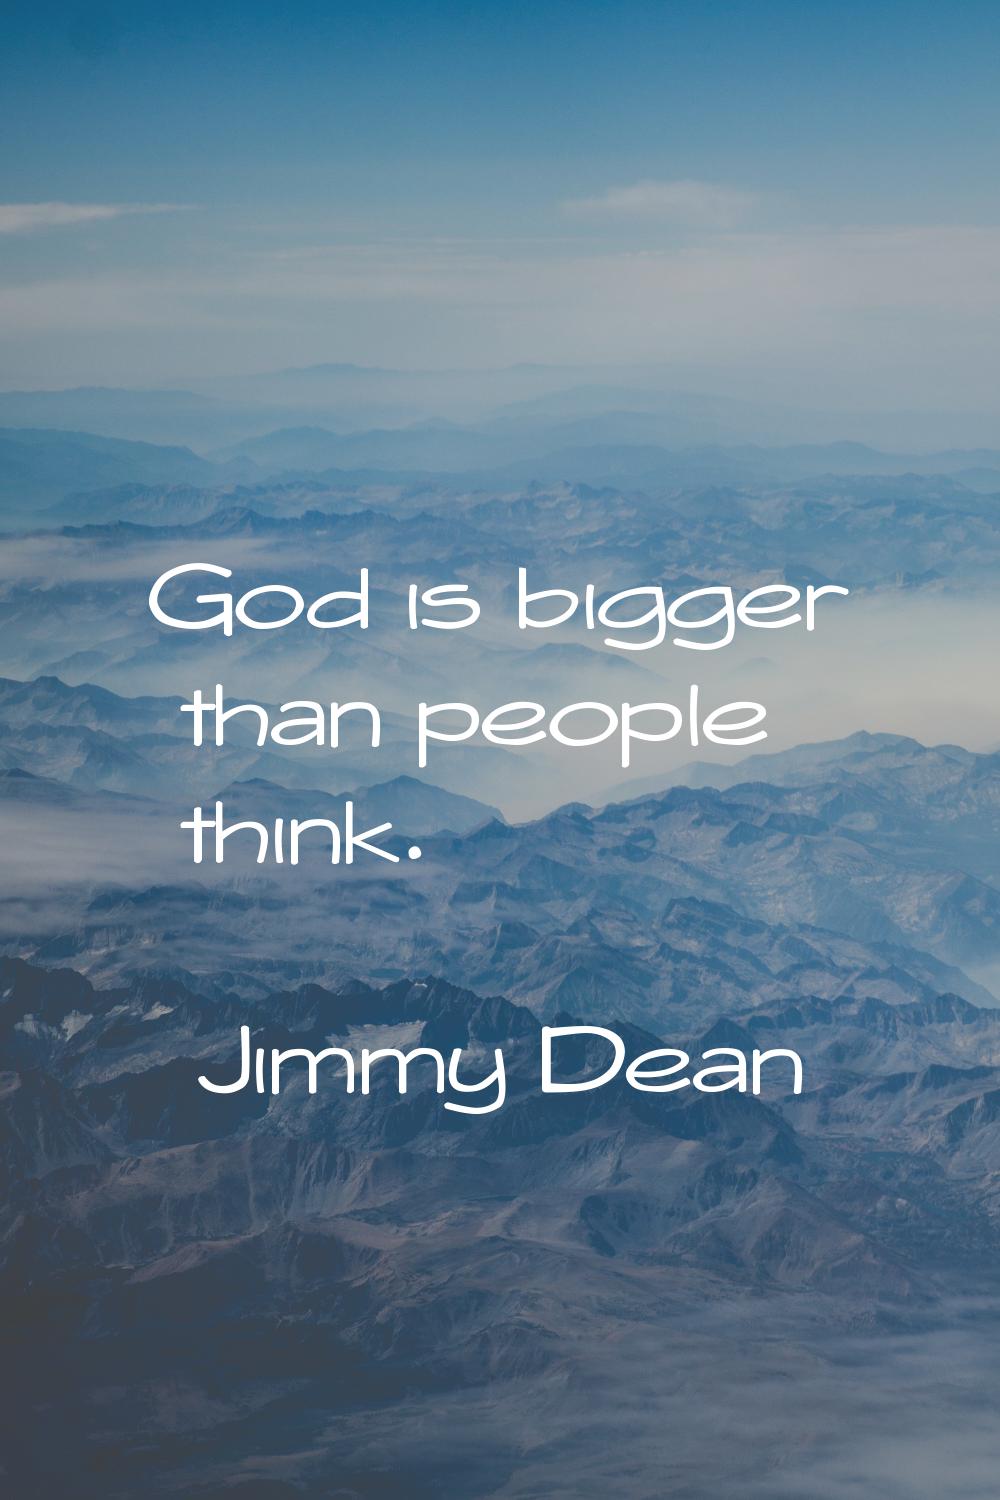 God is bigger than people think.